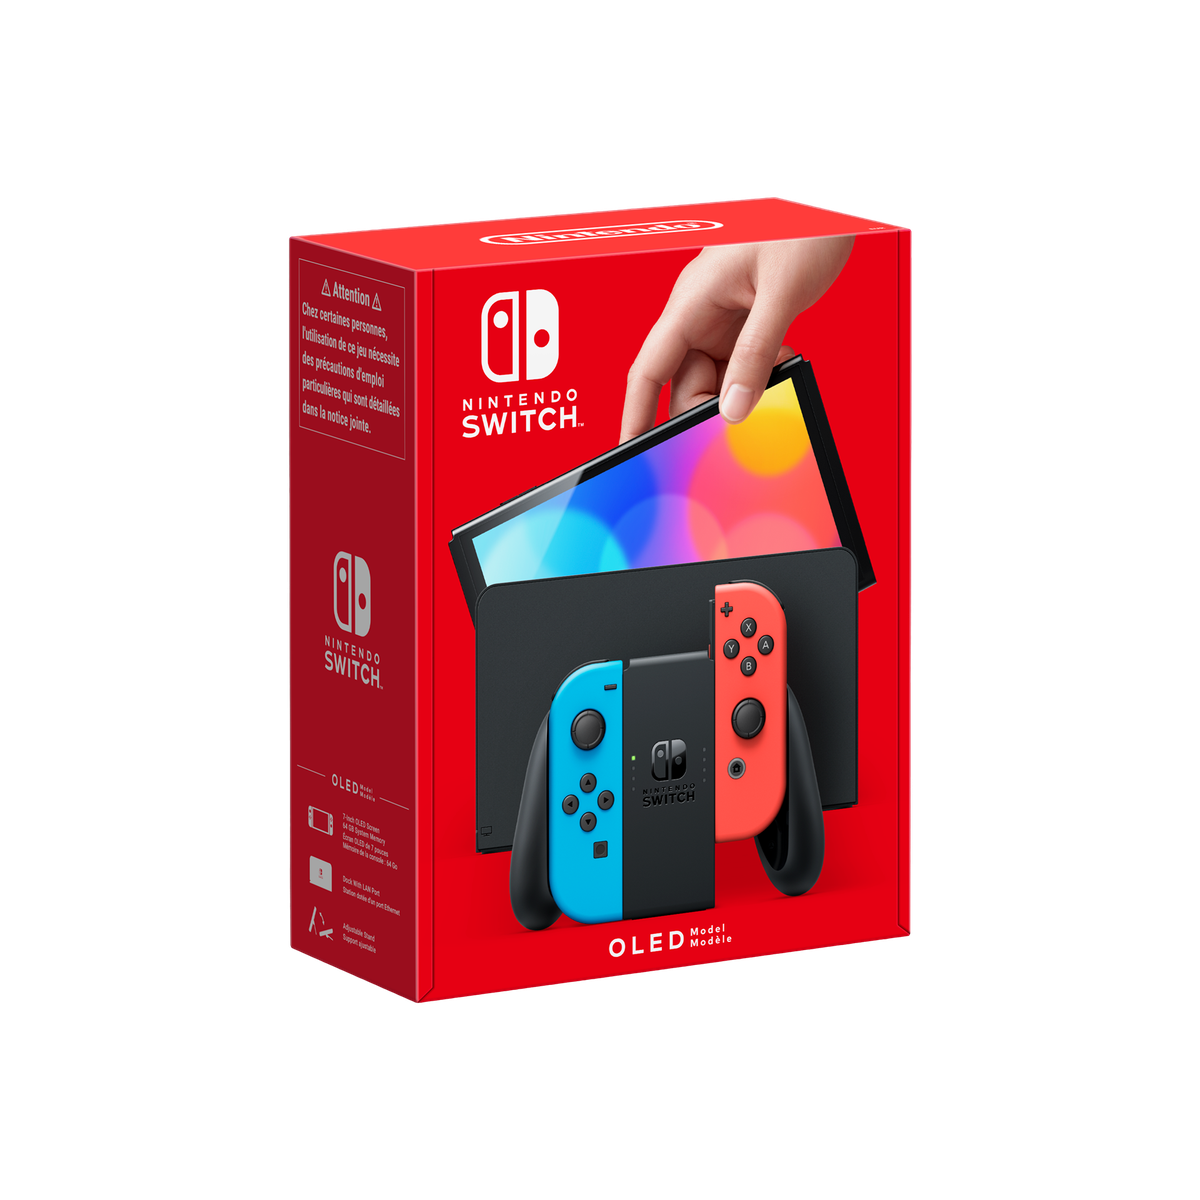 Nintendo Switch OLED Model - Neon Red / Blue